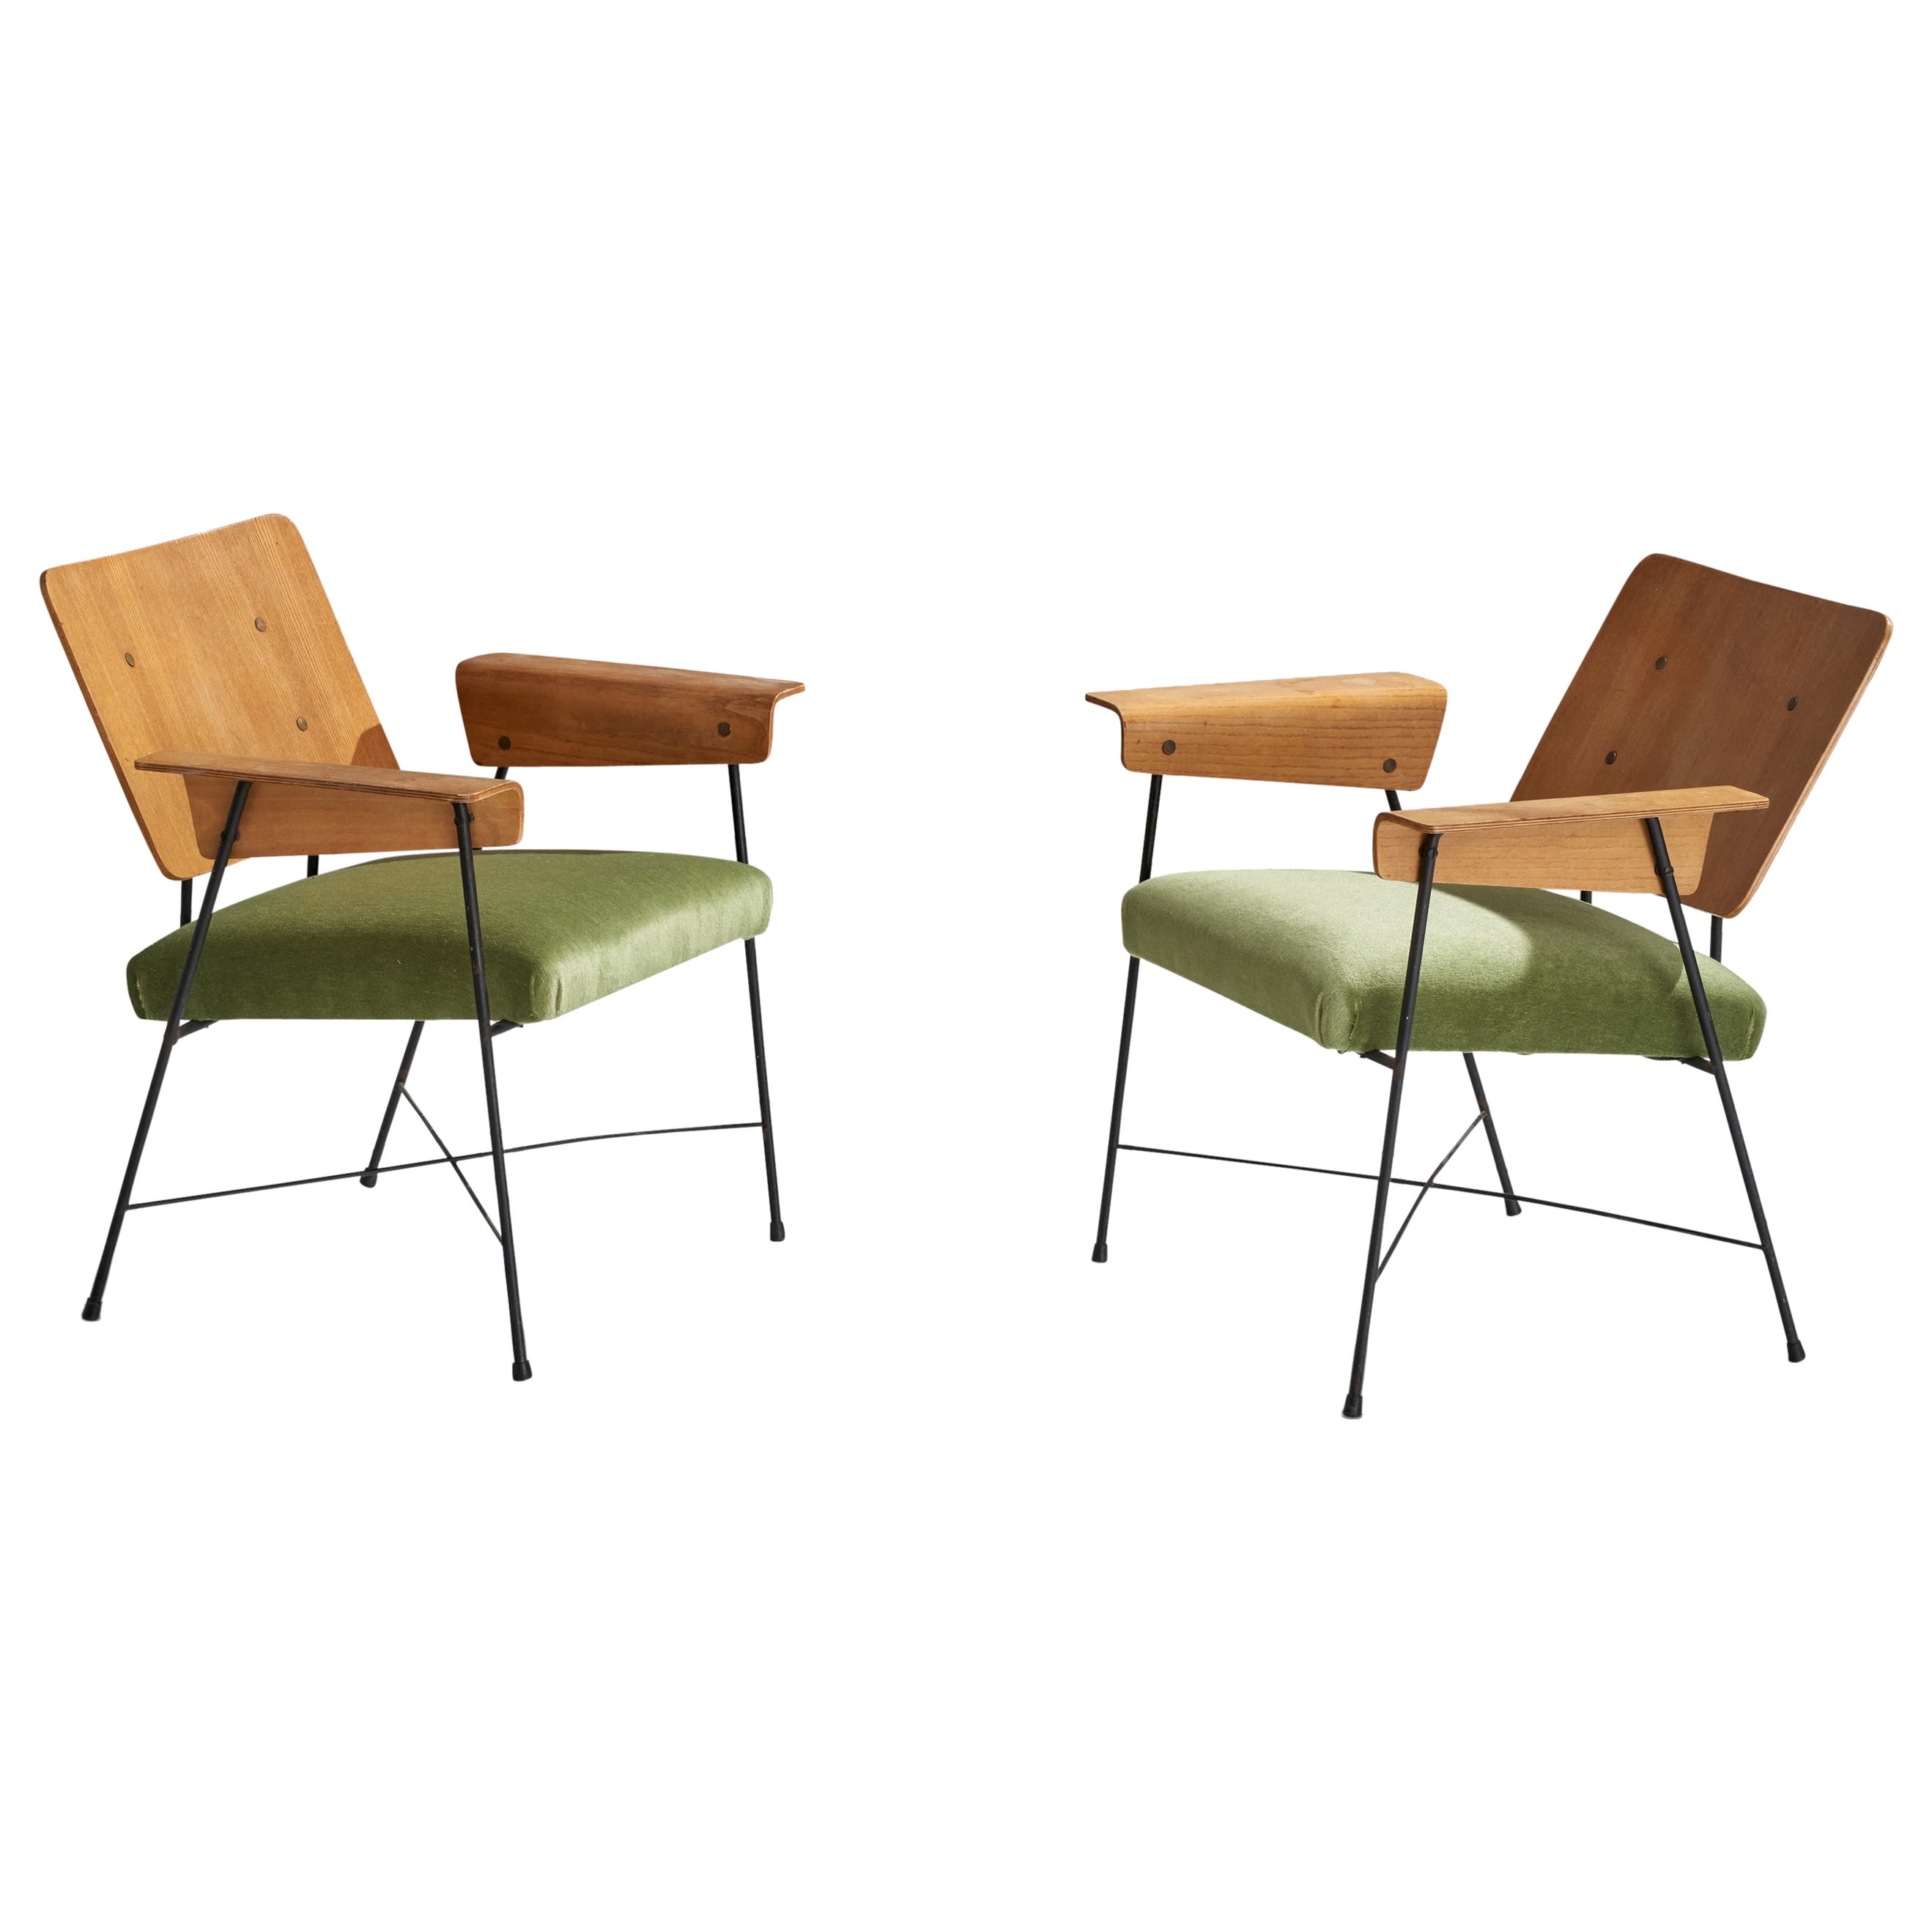 George Coslin, Lounge Chairs, Wood, Metal, Velvet, Italy, 1960s For Sale